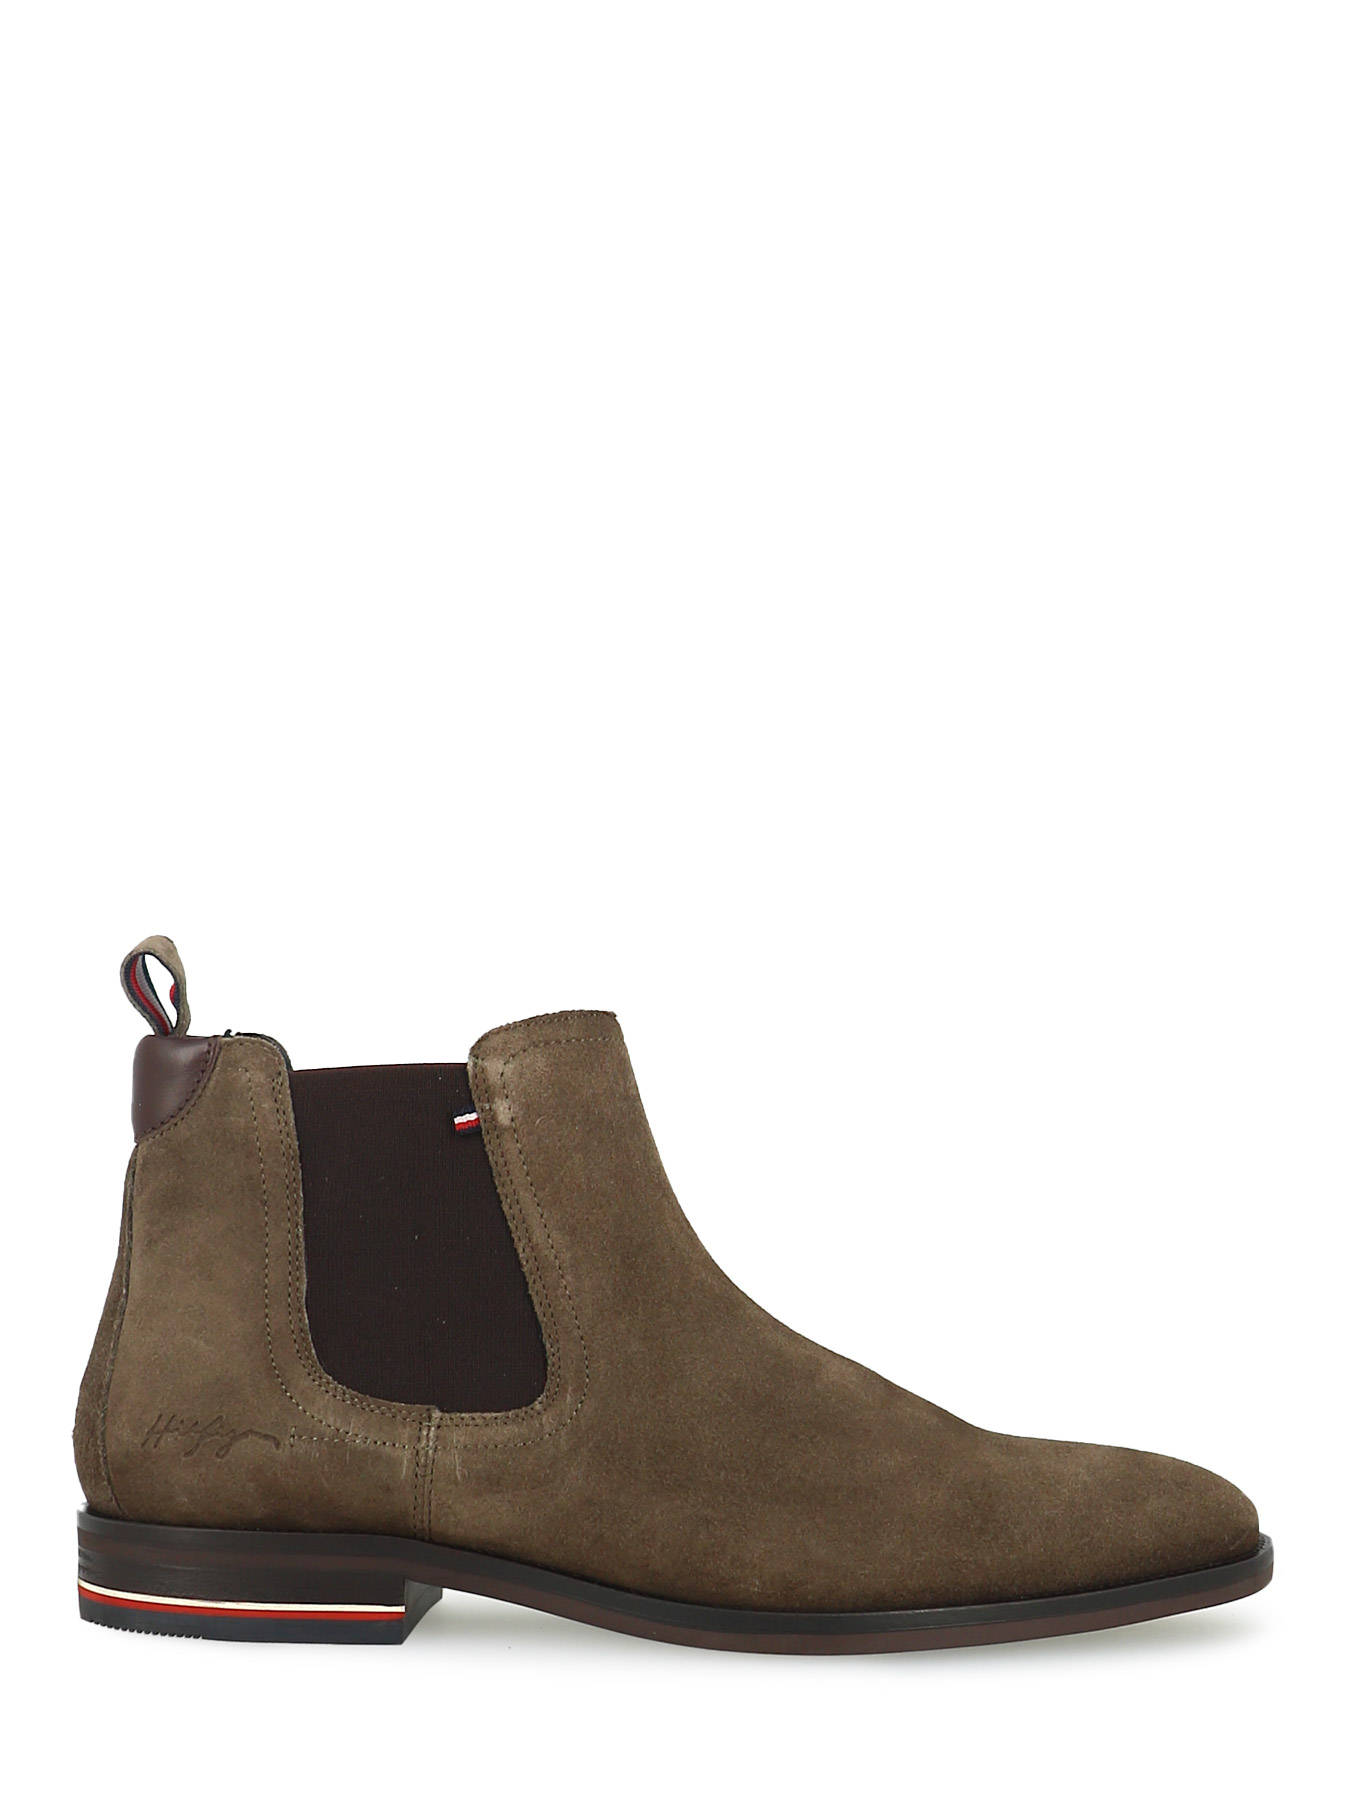 chelsea boots tommy hilfiger